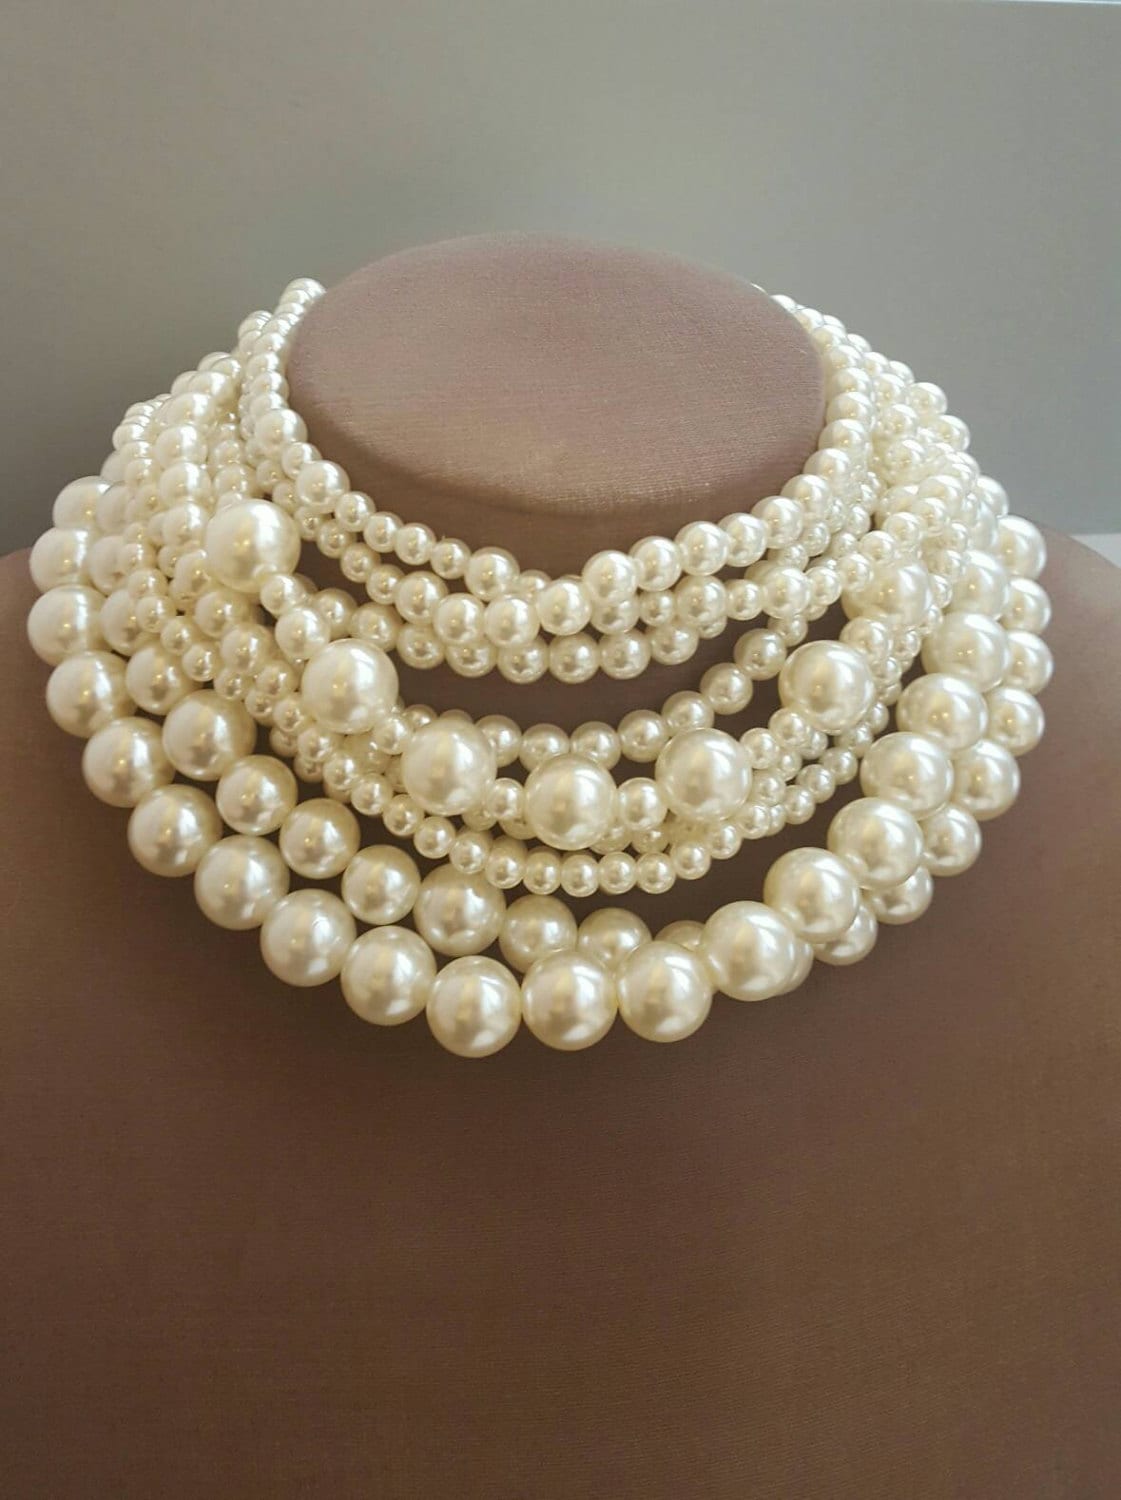 Florosy Long Bead Chain Chunky Simulated Pearl Necklace Body Jewelry For  Women Costume Choker Pendant Statement Necklace New J190711 From Mala84,  $31.73 | DHgate.Com